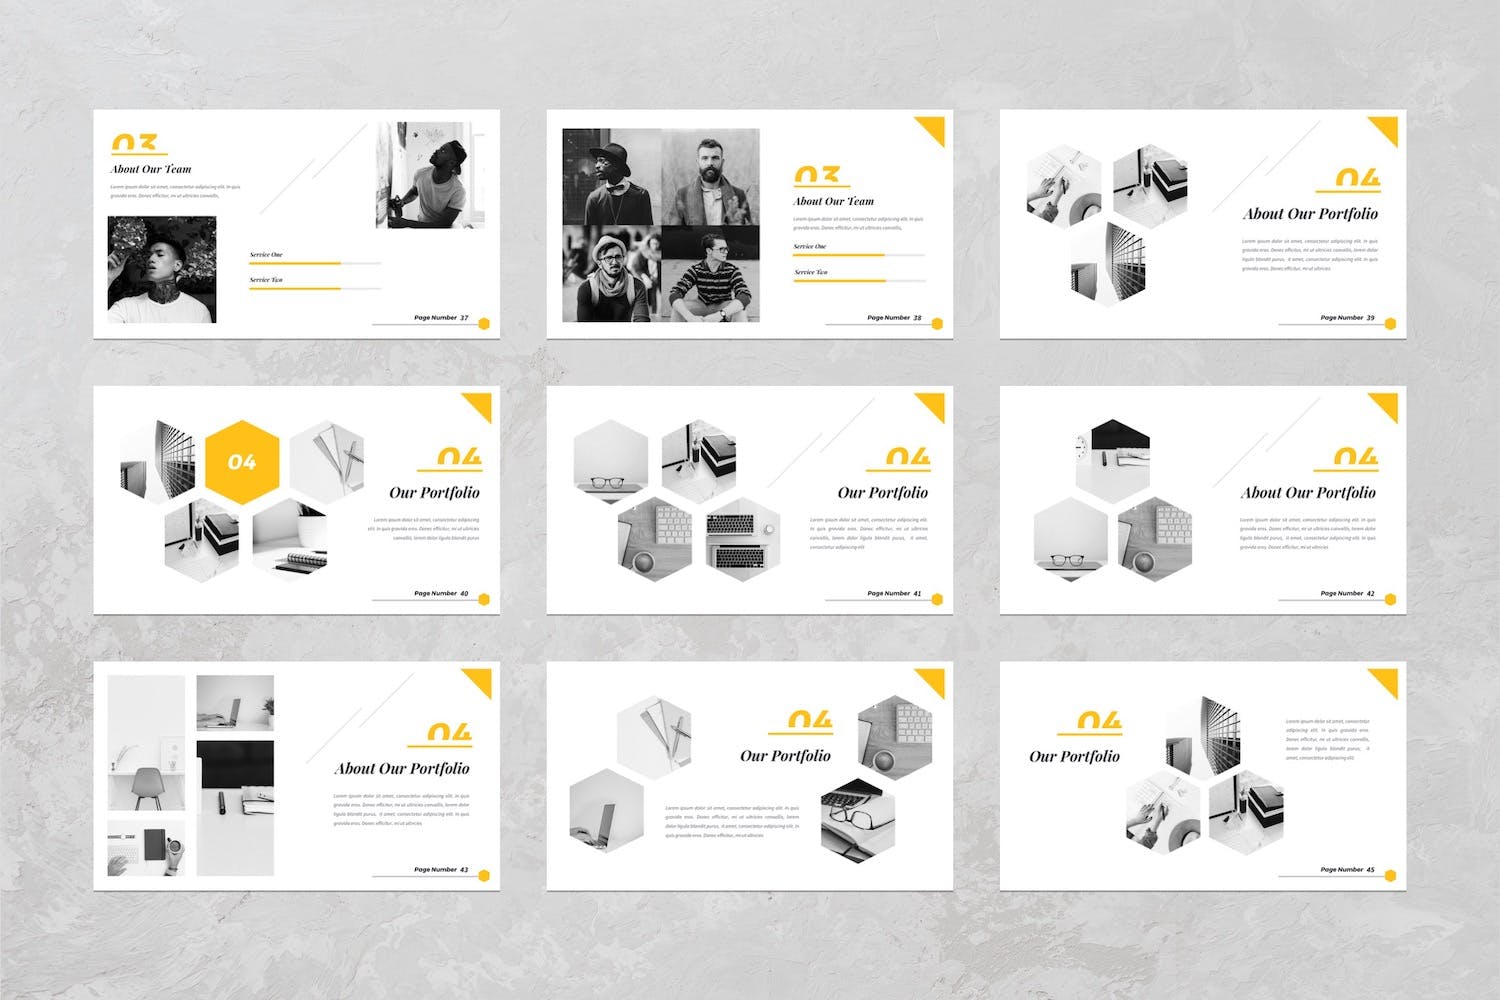 Grey colored slides with yellow elements.